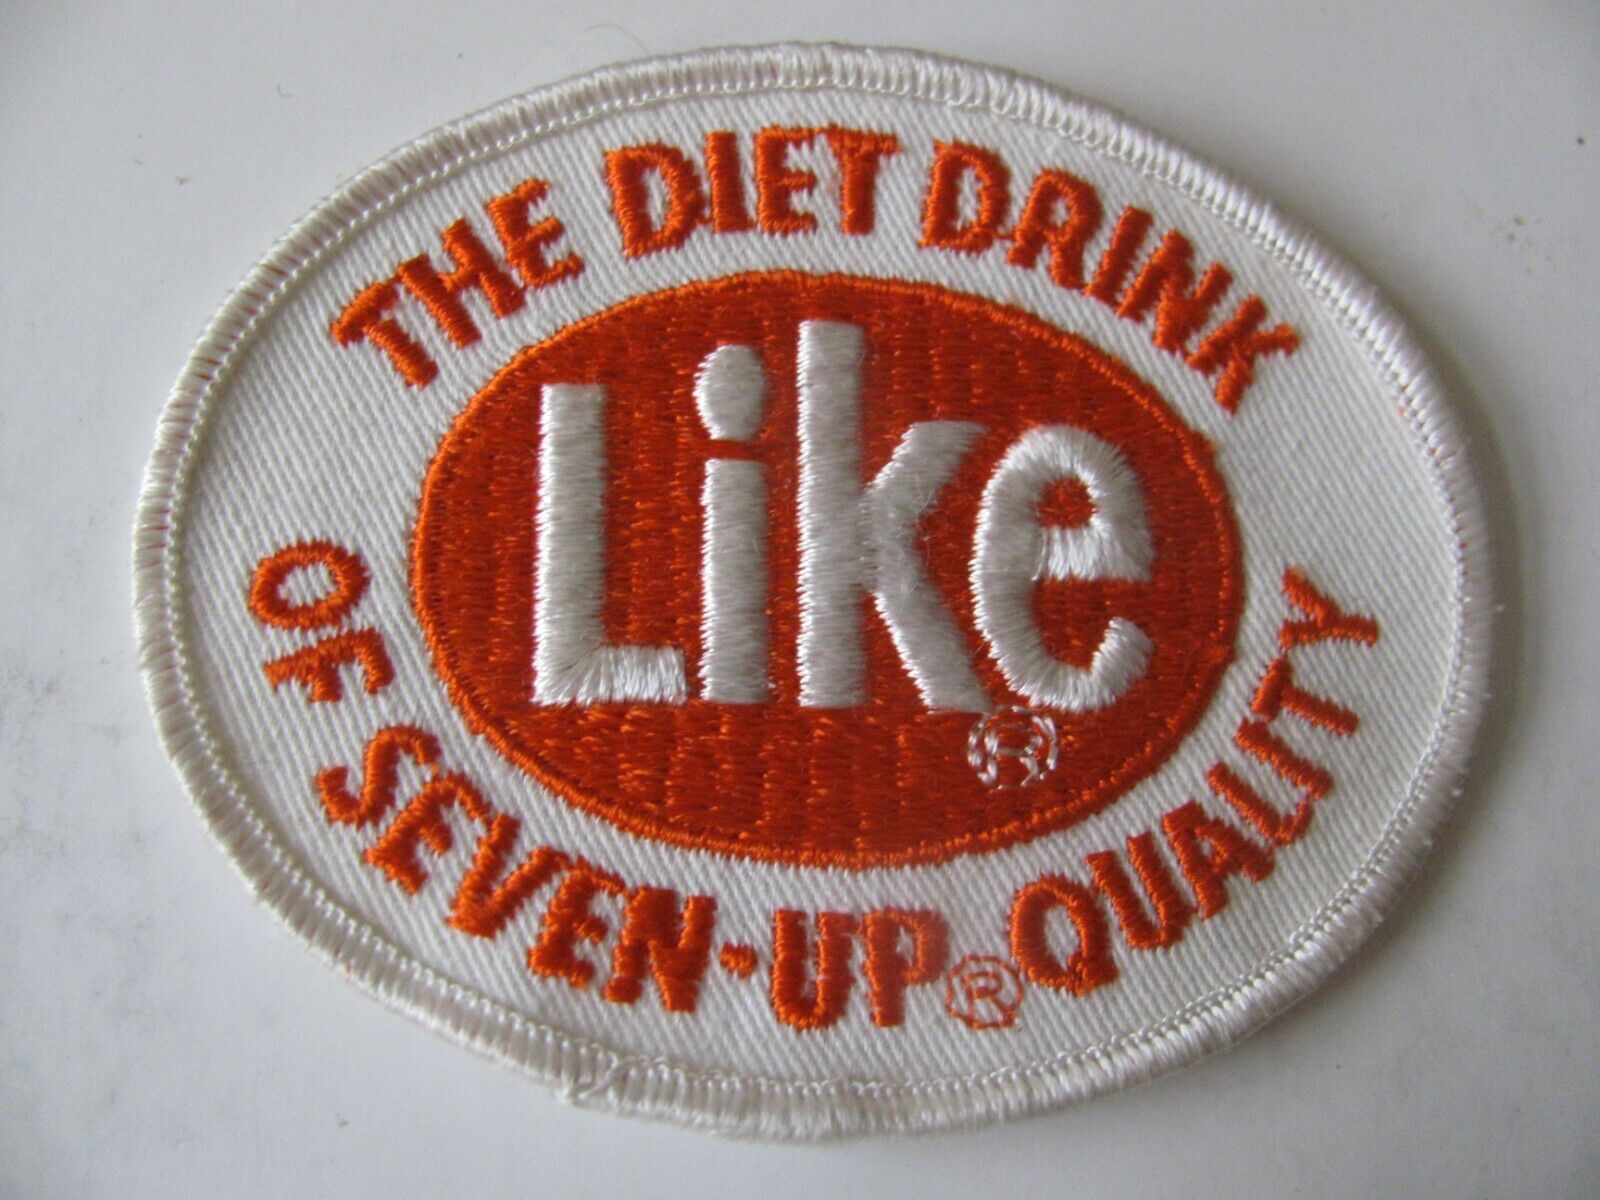 Like Diet Drink Soda Pop Beverage Patch  Embroidered Nos New Stock Free Shipping